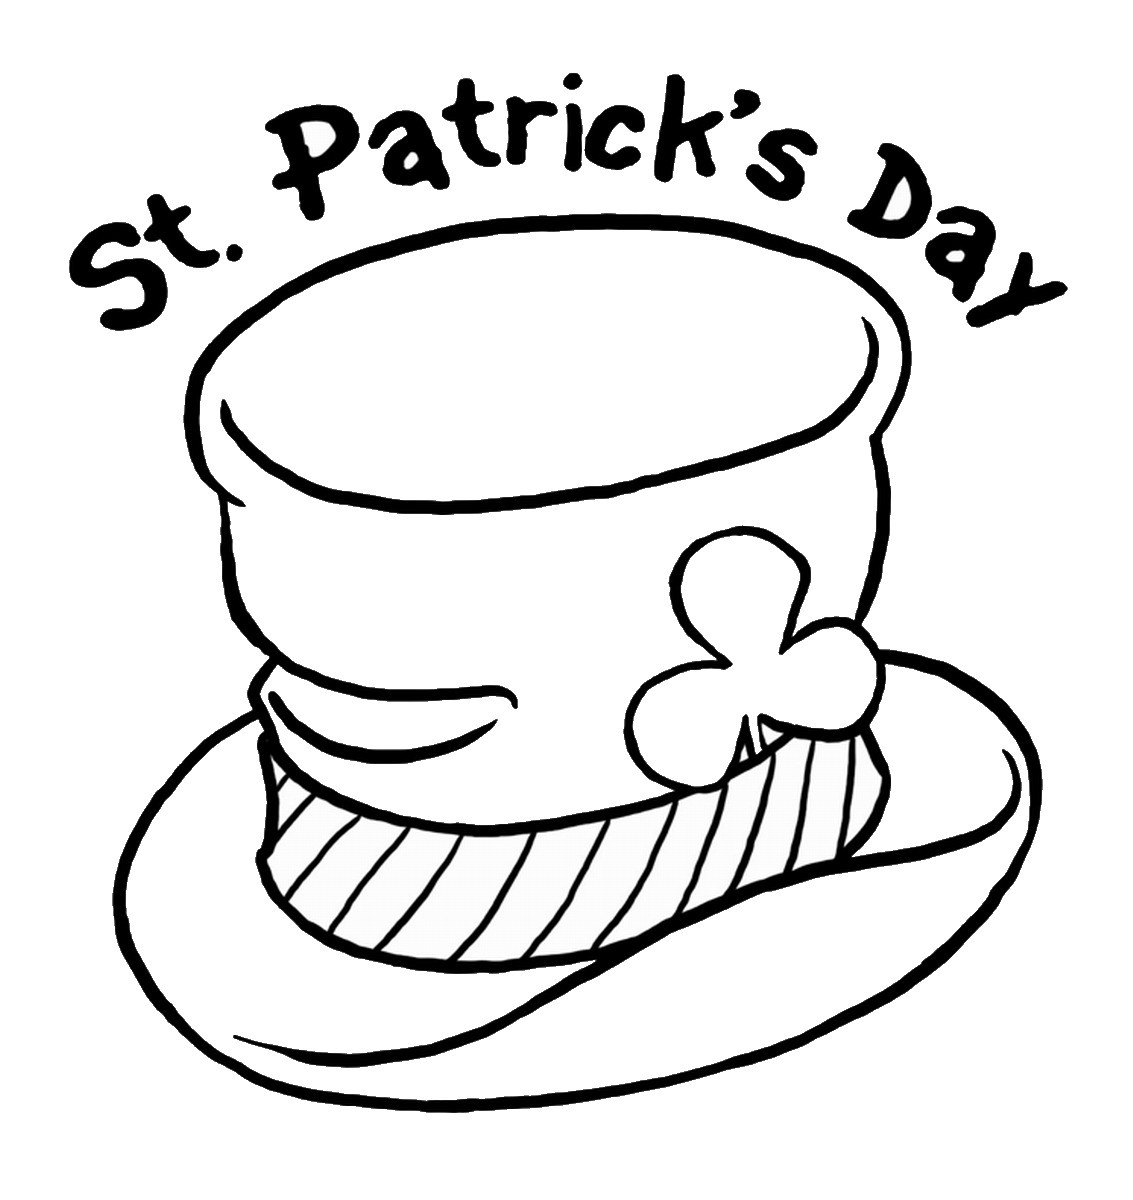 St Patricks Coloring Pages
 St Patrick s Day Coloring Pages for childrens printable